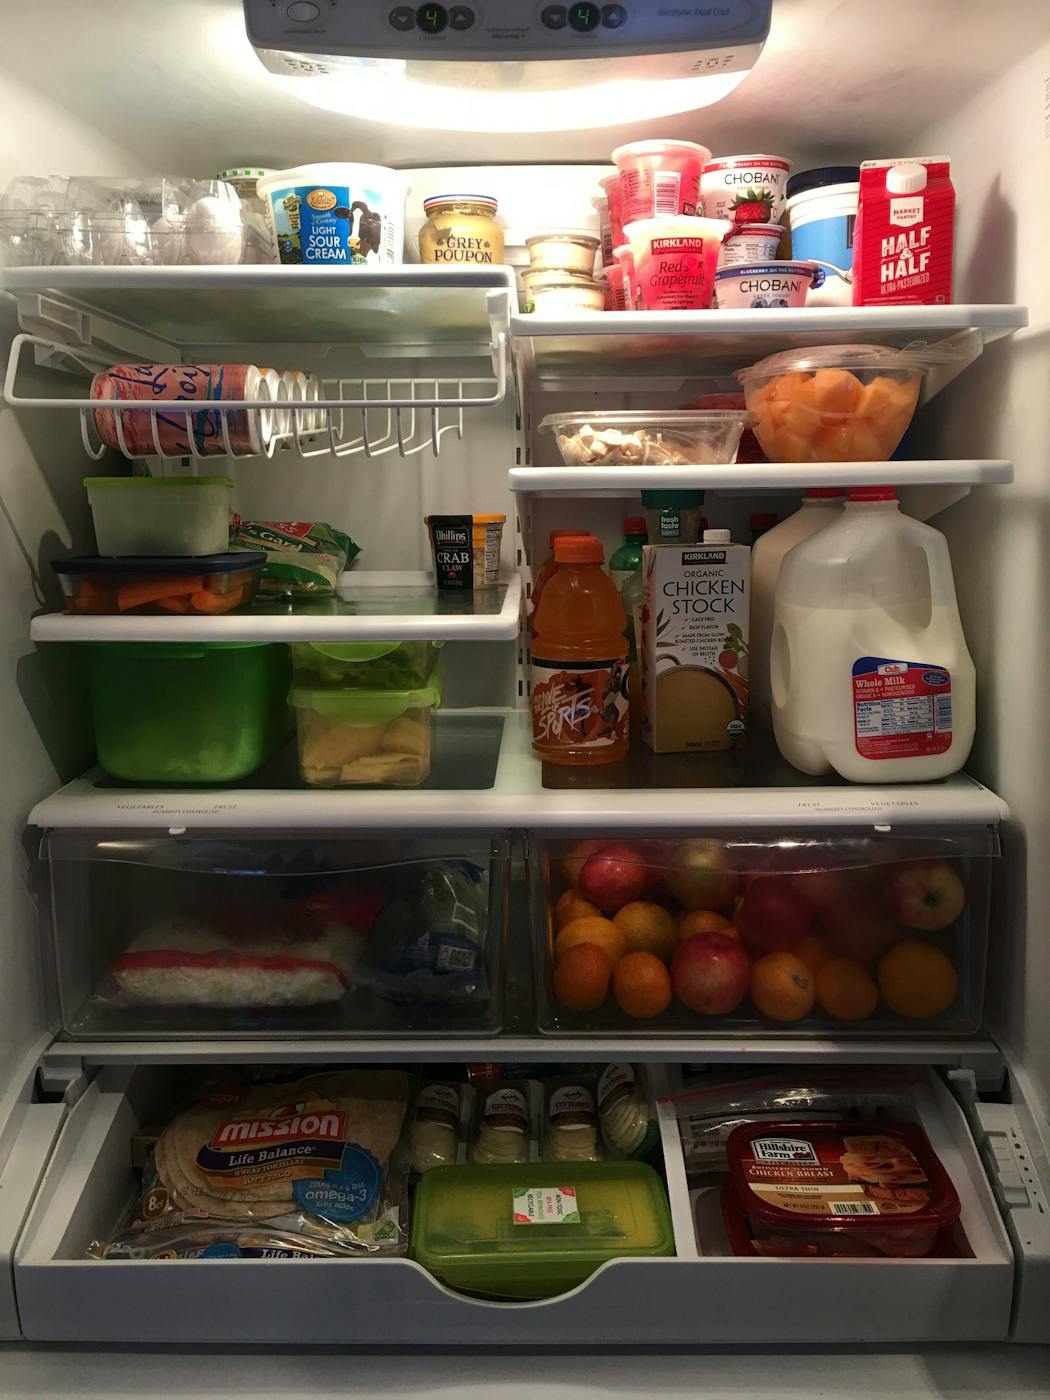 A well-organized fridge should keep items that are about to expire up front and eye level, says chef and professional organizer Joor Erin. She also makes sure fruits and veggies are highly visible for her kids.